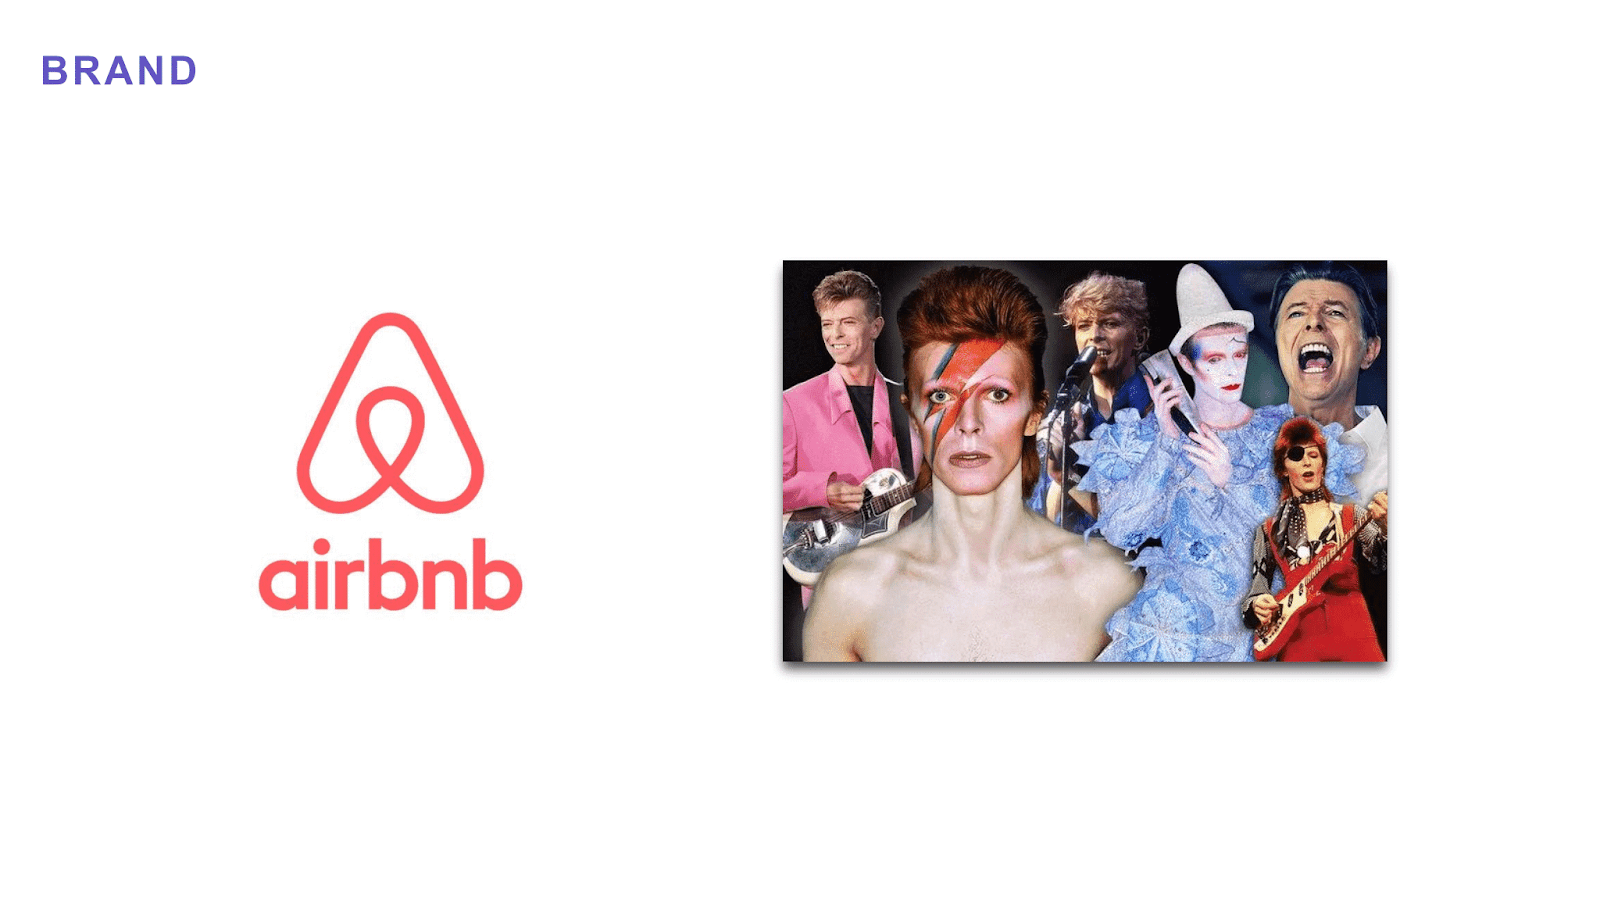 Brand examples: Airbnb and David Bowie's many alter-egos